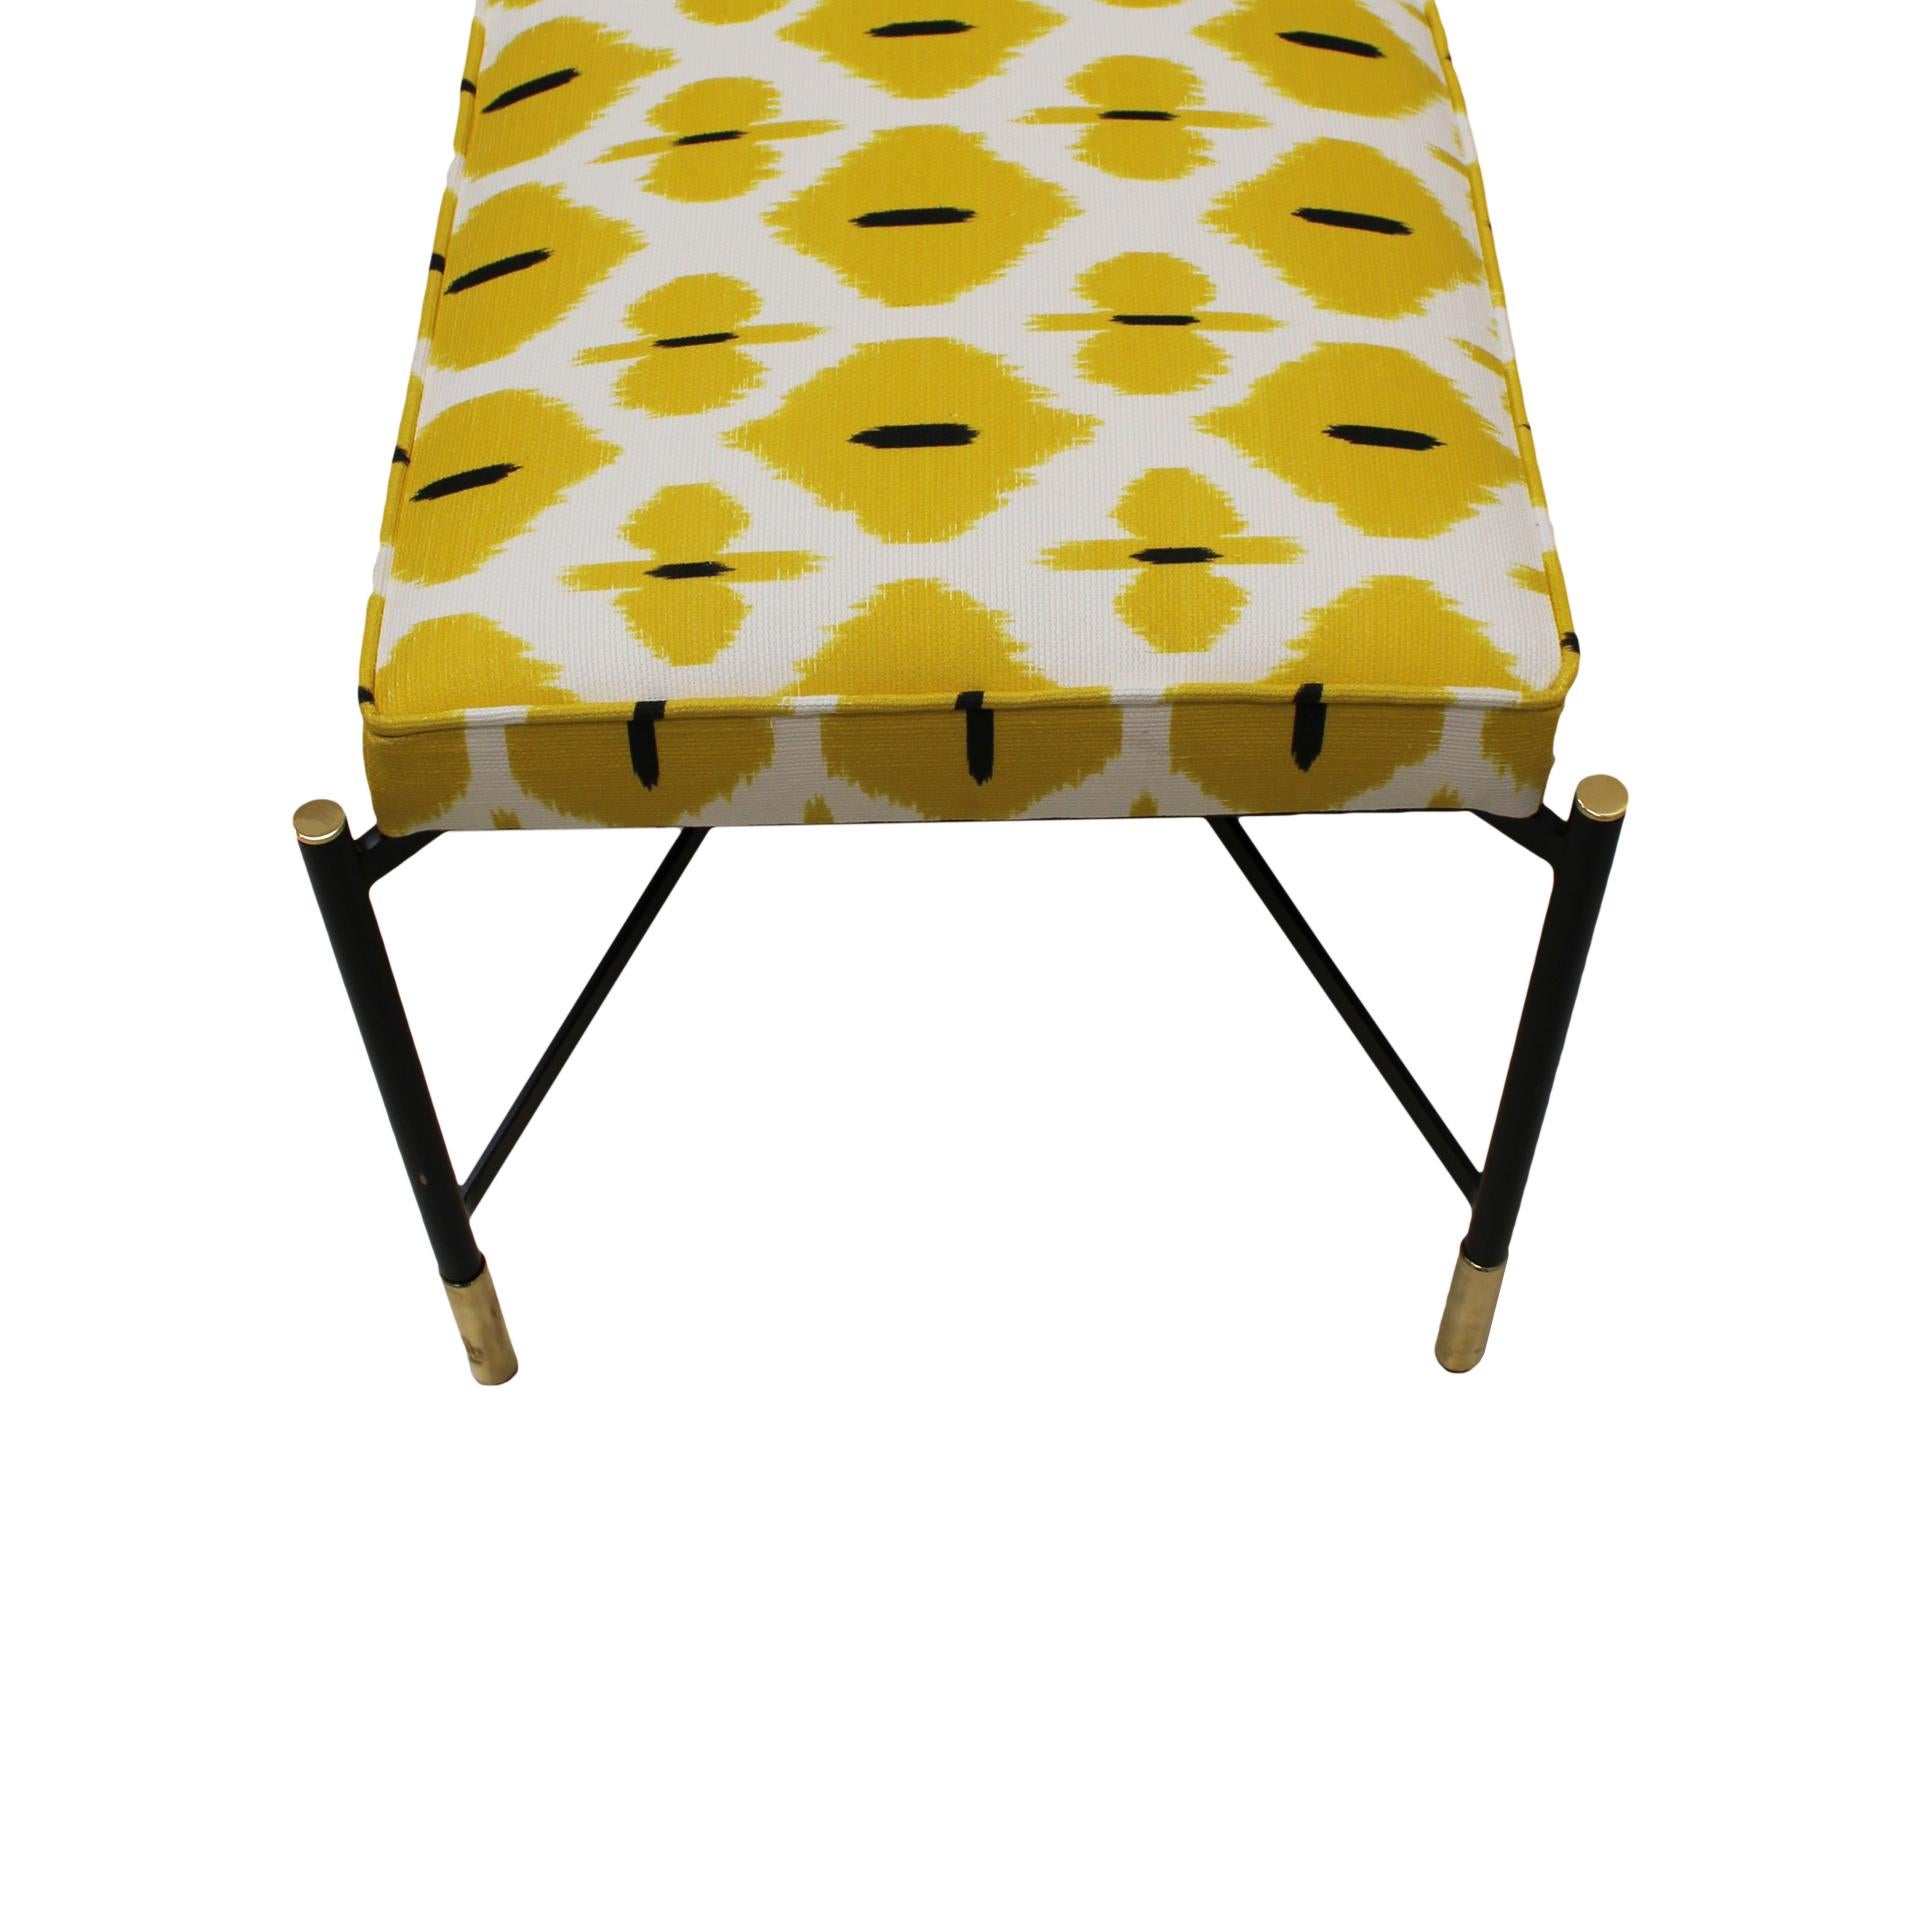 Late 20th Century Modern Black Lacquered Iron and Patterned Fabric, 1970s Italian Stool For Sale